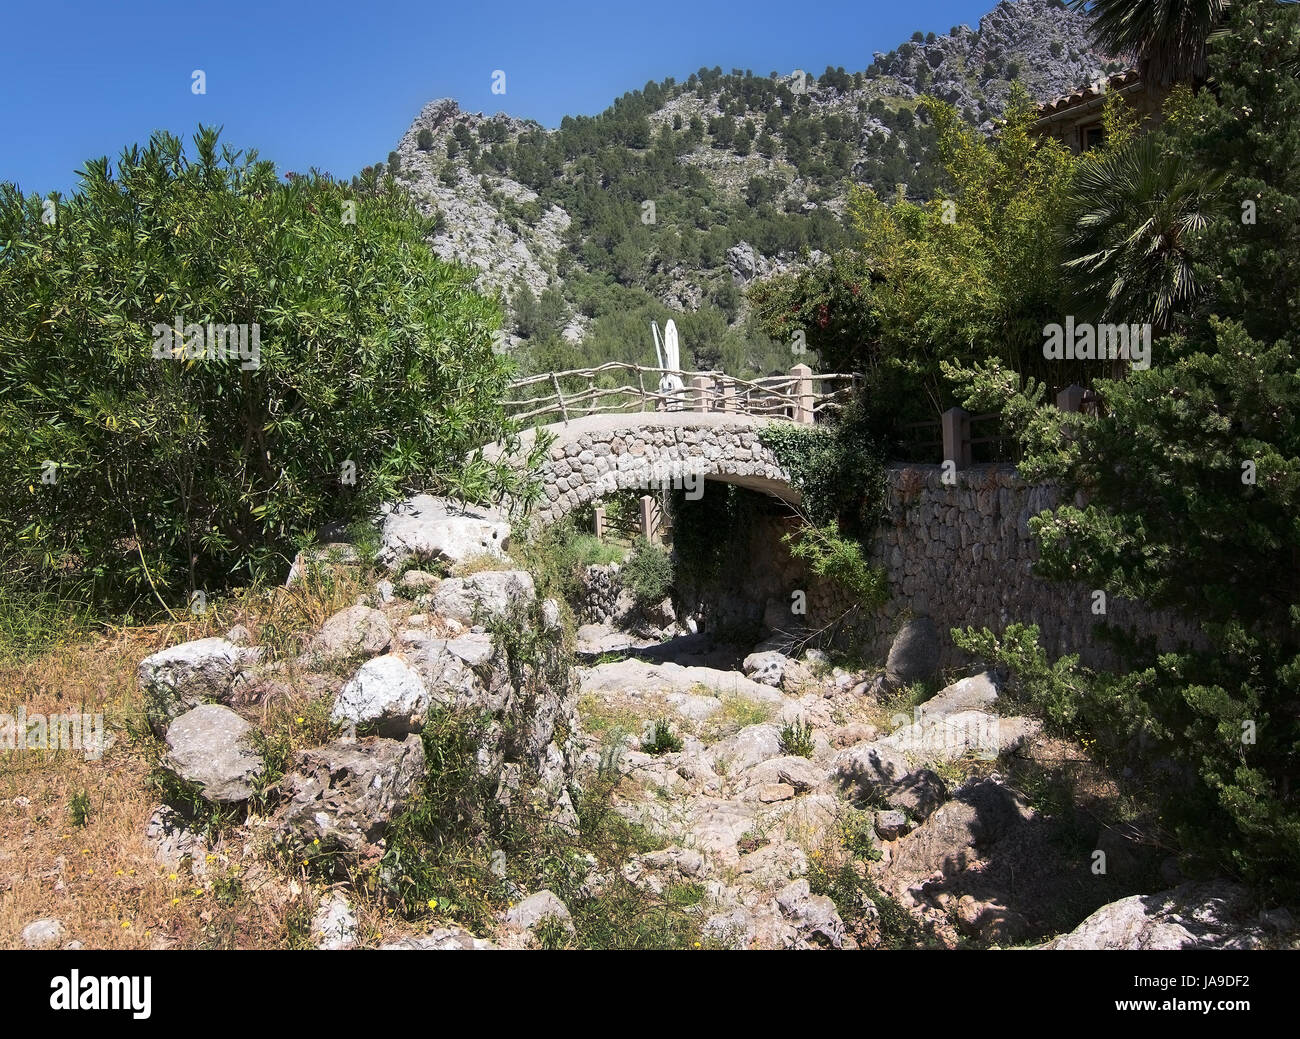 Walking path bridge landscape view in Tramuntana mountains between Soller and Cala Tuent, Mallorca, Spain. Stock Photo